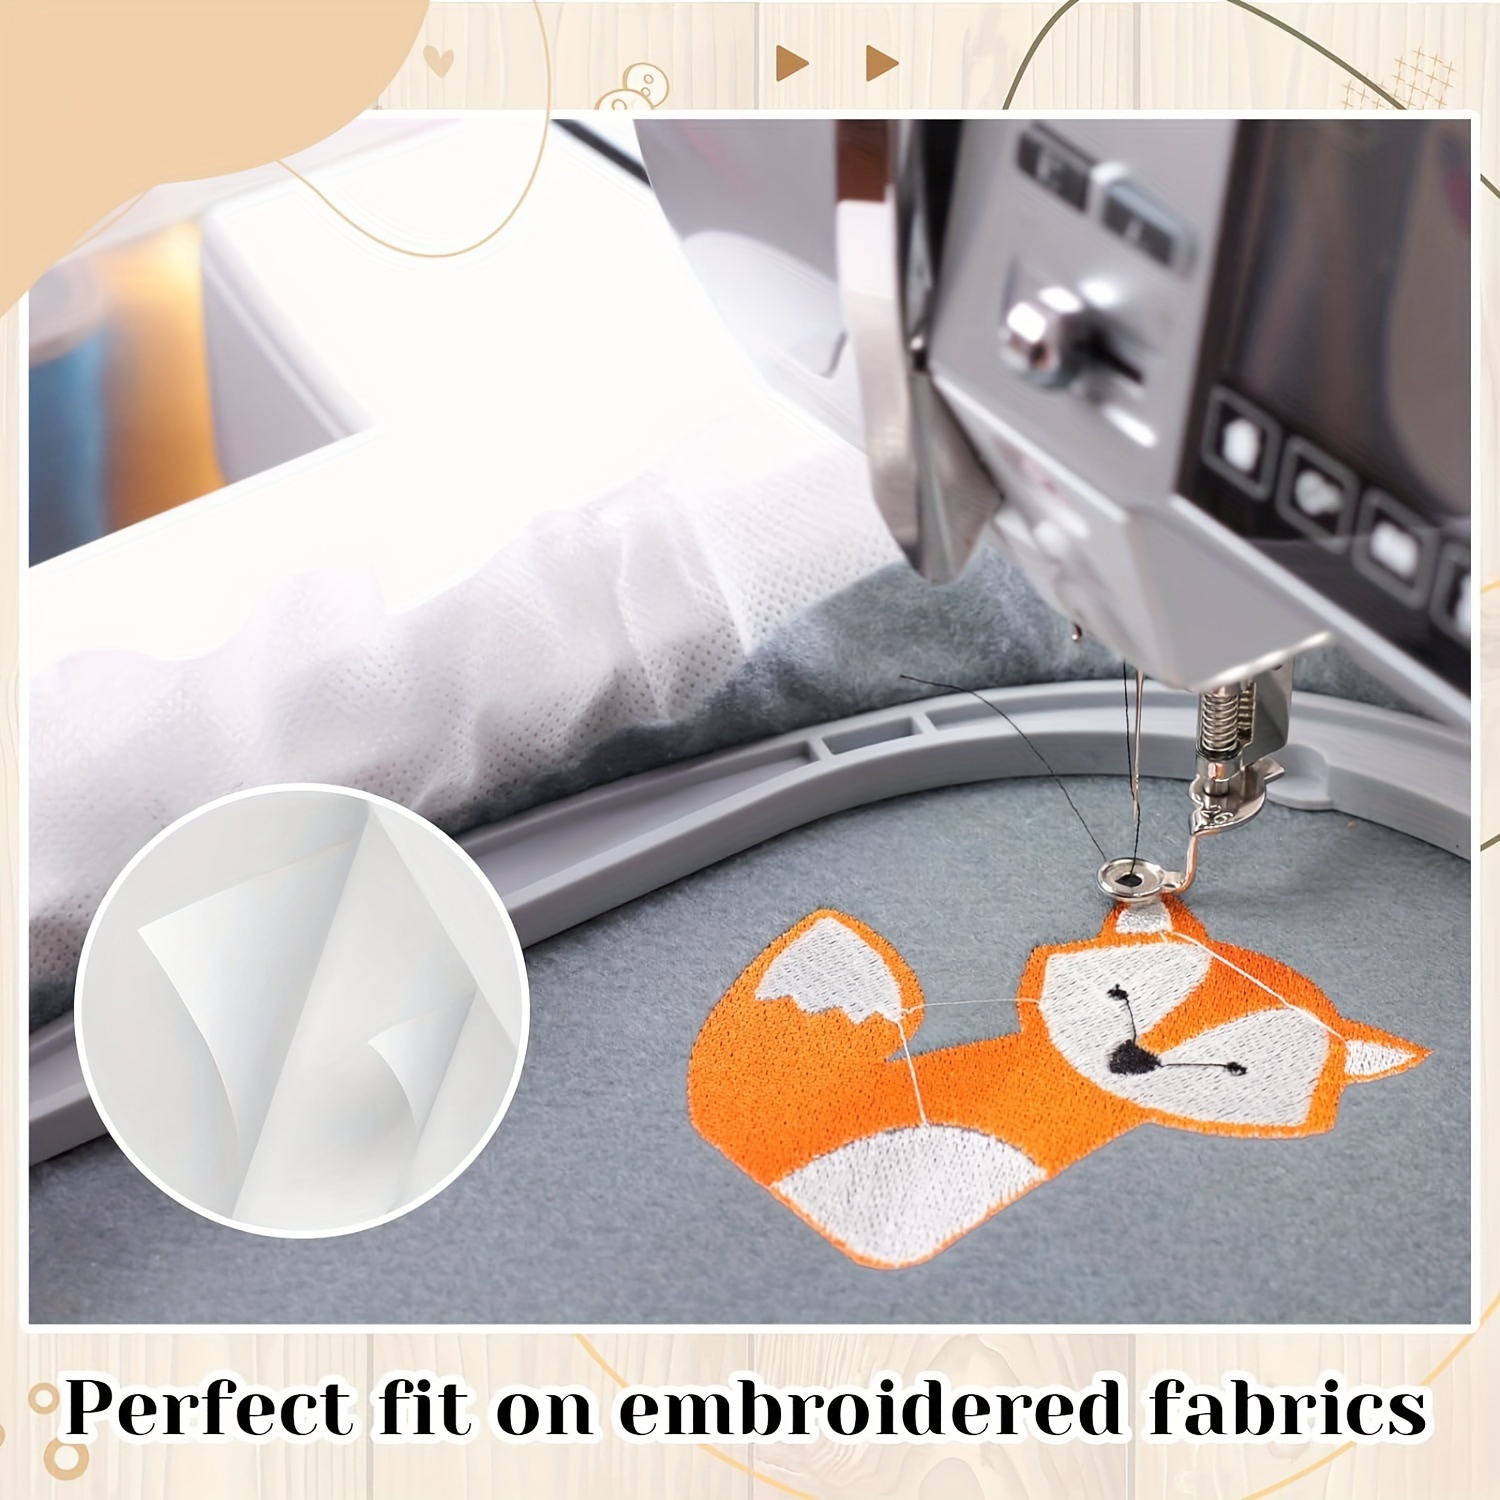 Tear Away Stabilizer Embroidery, Embroidery Liner